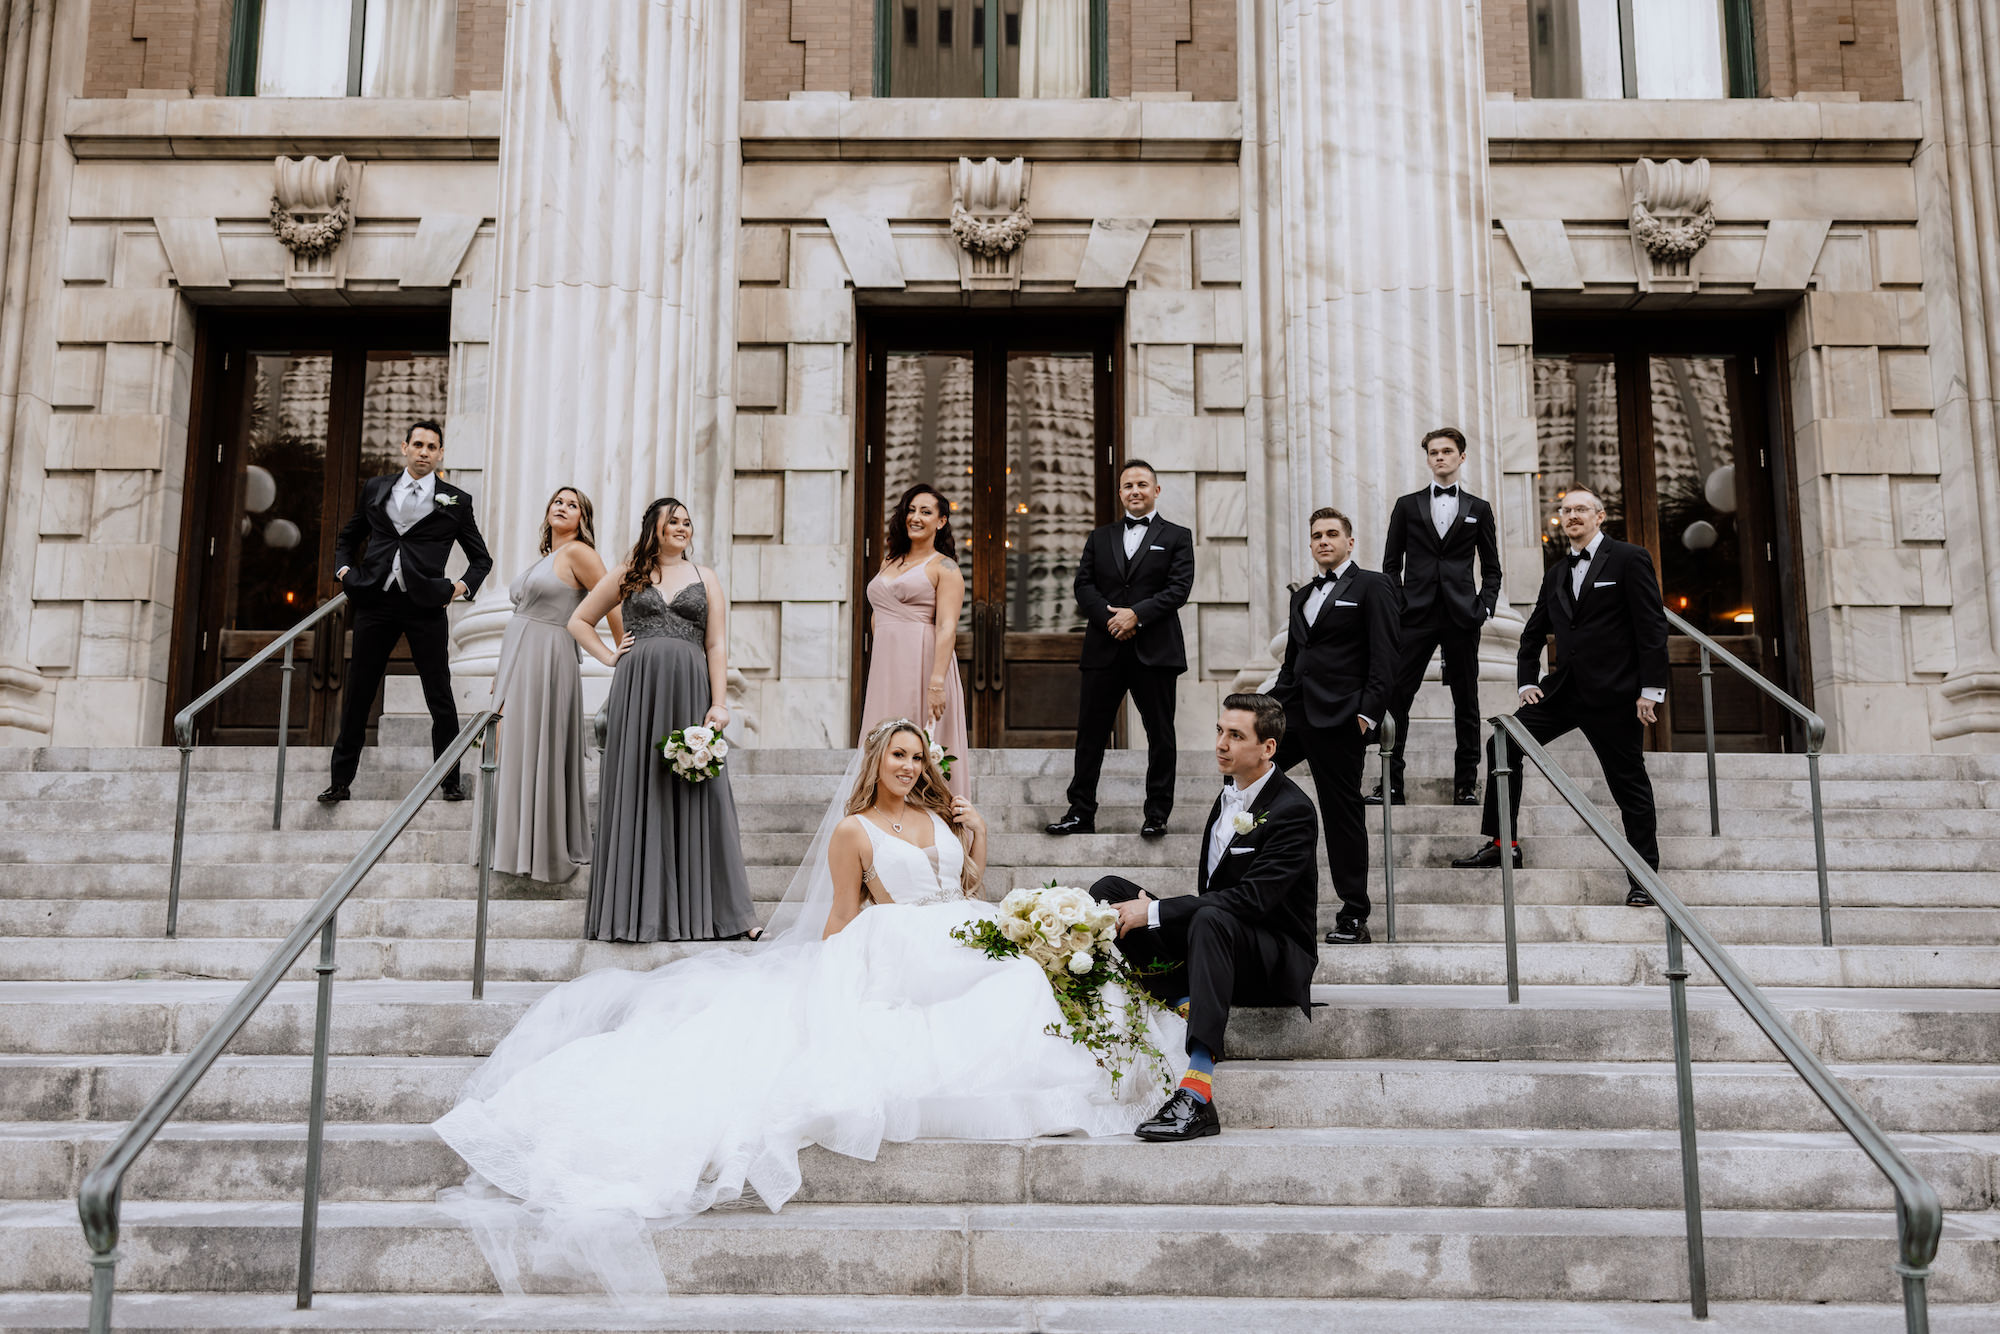 Winter Inspired Wedding, Bride and Groom Wedding Portrait on Staircase of Historic Wedding Venue Le Meridien and Wedding Party | Tampa Bay Wedding Hair and Makeup Femme Akoi Beauty Studio